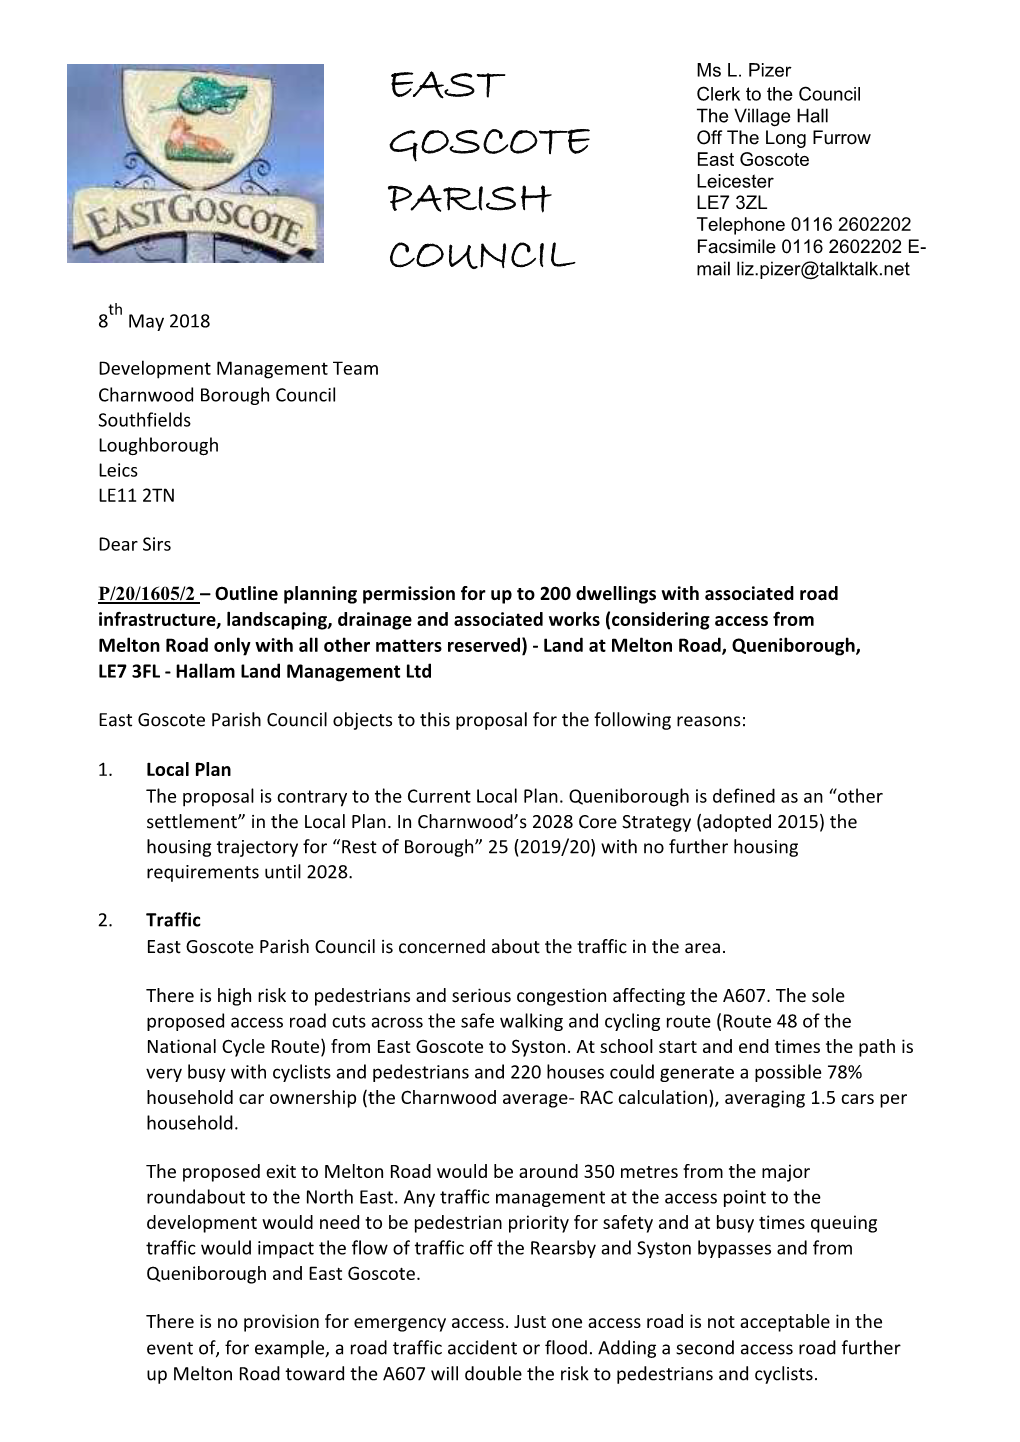 East Goscote Parish Council Objects to This Proposal for the Following Reasons